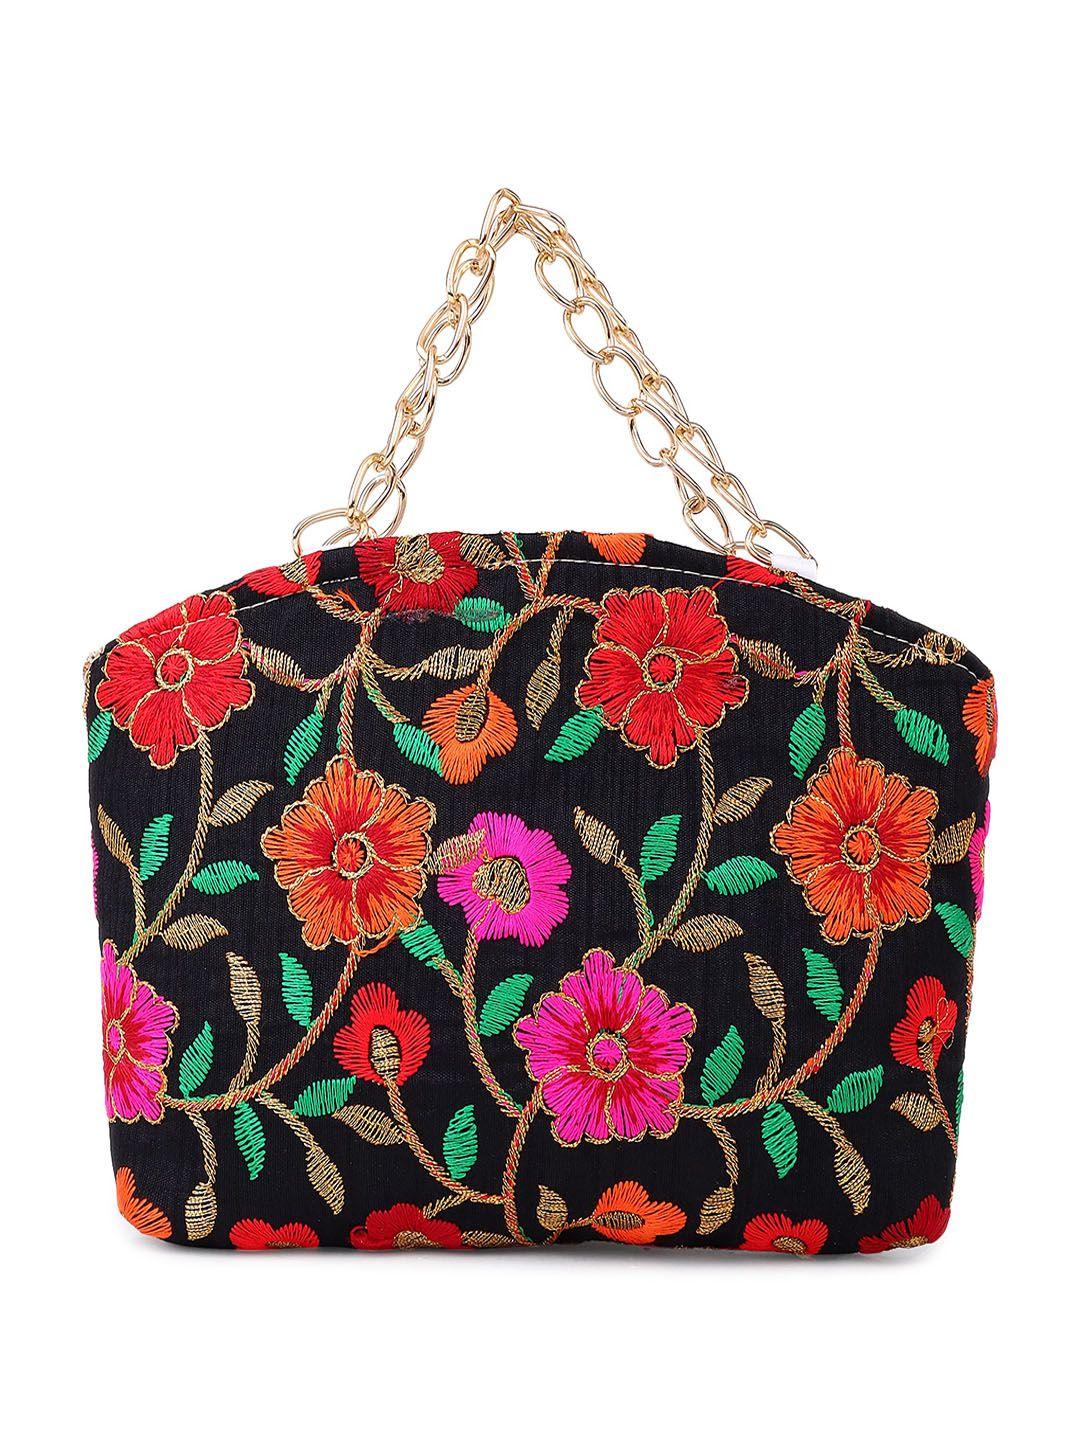 dn creation floral embroidered purse clutch